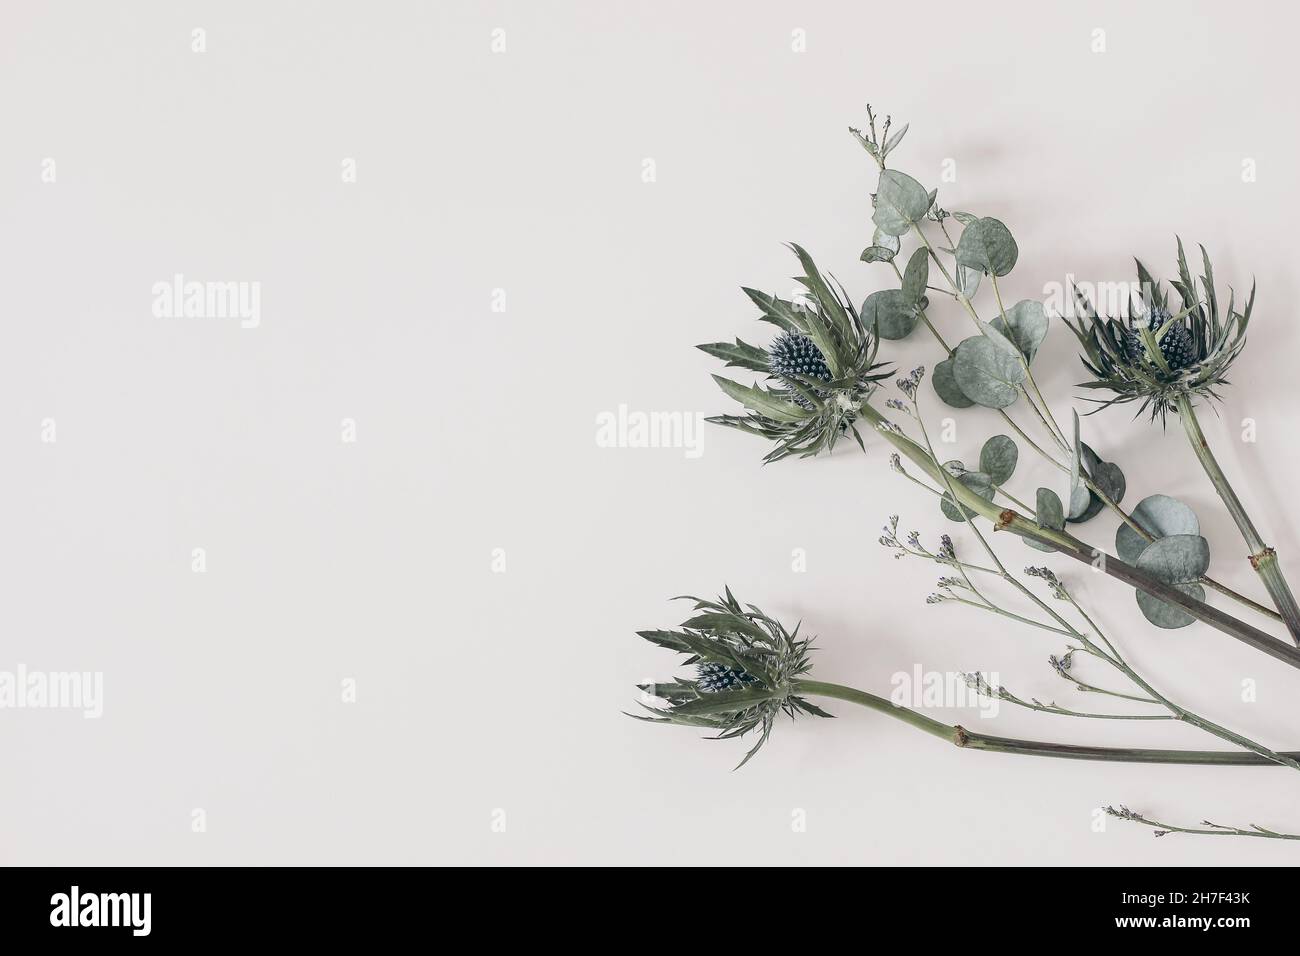 Green Eucalyptus leaves, branches. Blue limonium and Eryngium thistle, sea holly plants isolated on white table background. Decorative floral Stock Photo